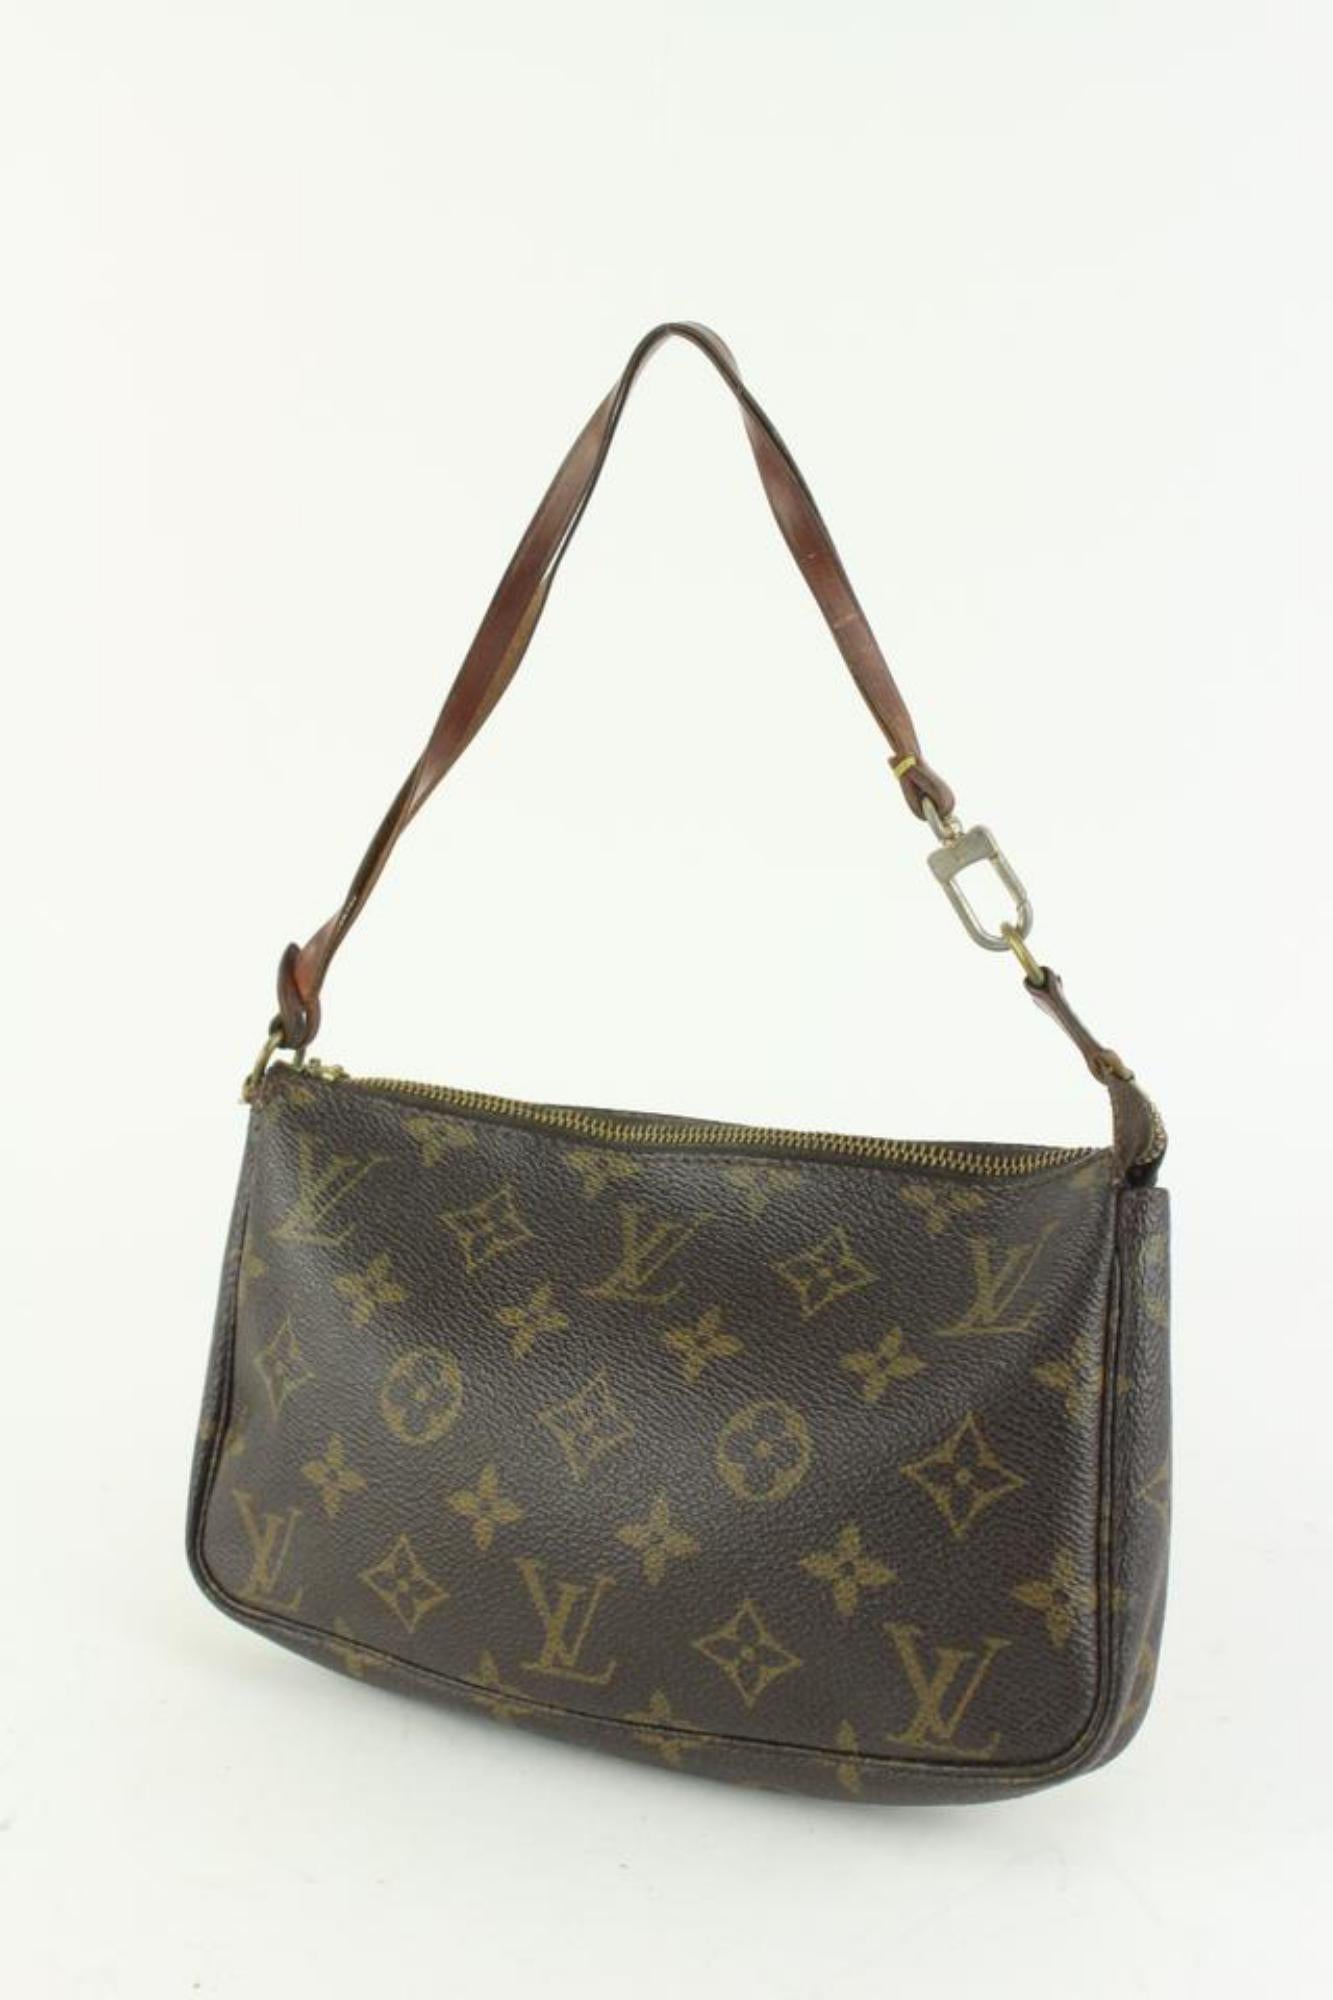 Louis Vuitton Monogram Pochette Accessories Wristlet Pouch 1216lv42
Date Code/Serial Number: AR0070
Made In: France
Measurements: Length:  8.5